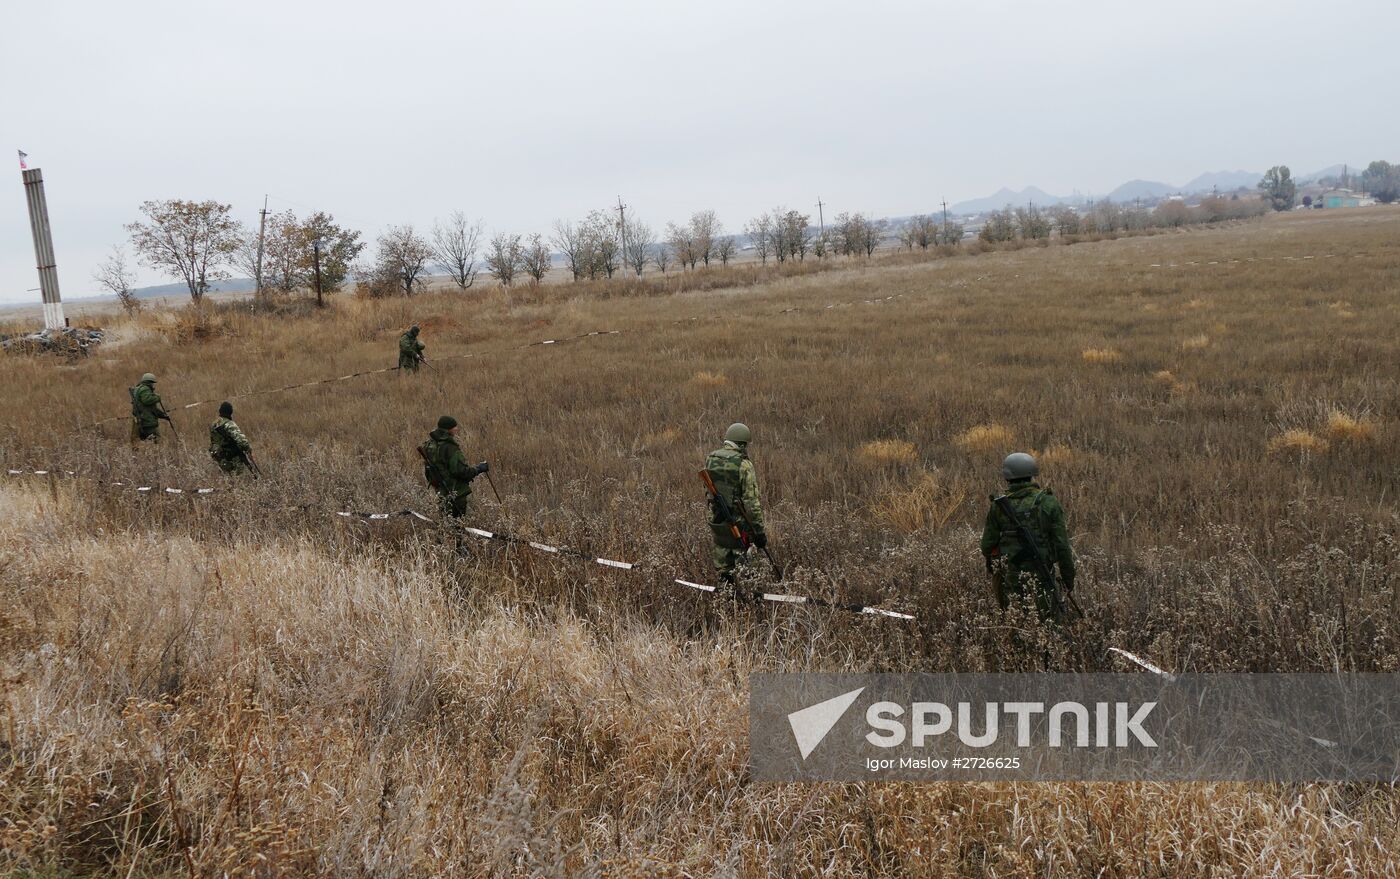 Mine clearing continues around Donetsk